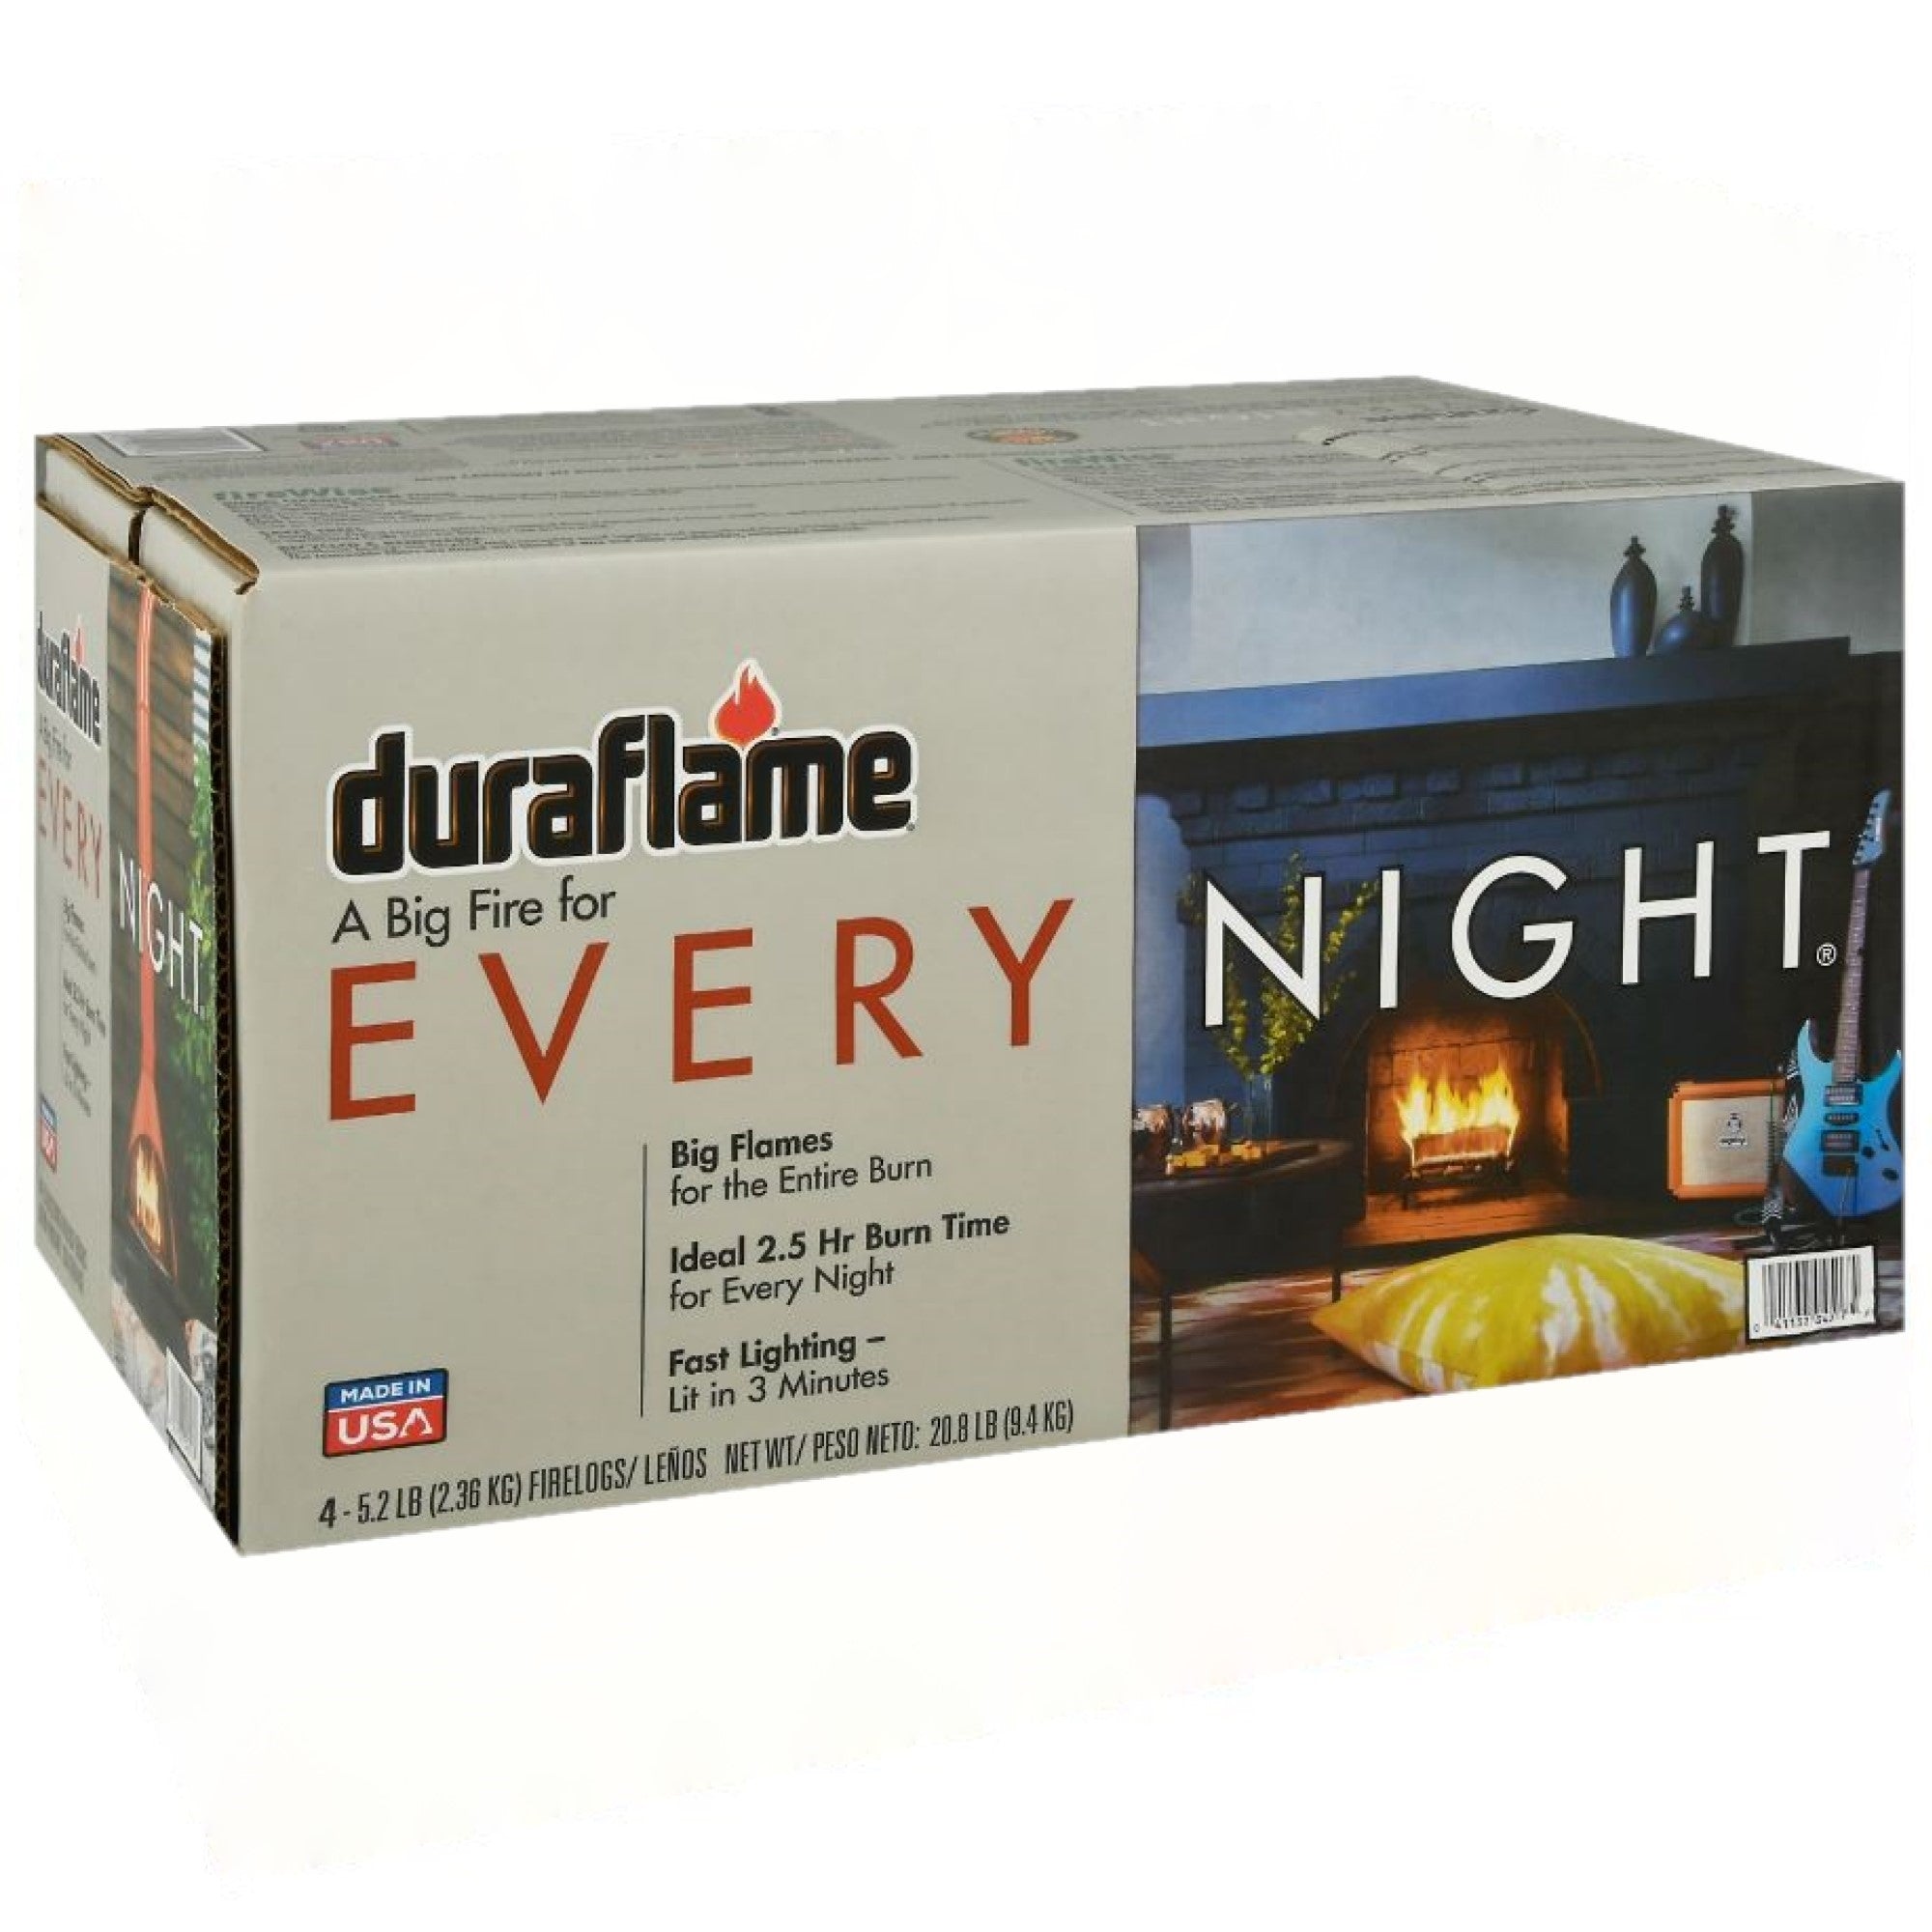 Duraflame Every Night Firelogs, 2.5 Hour Burn Time, 5.2lb (Pack of 4)